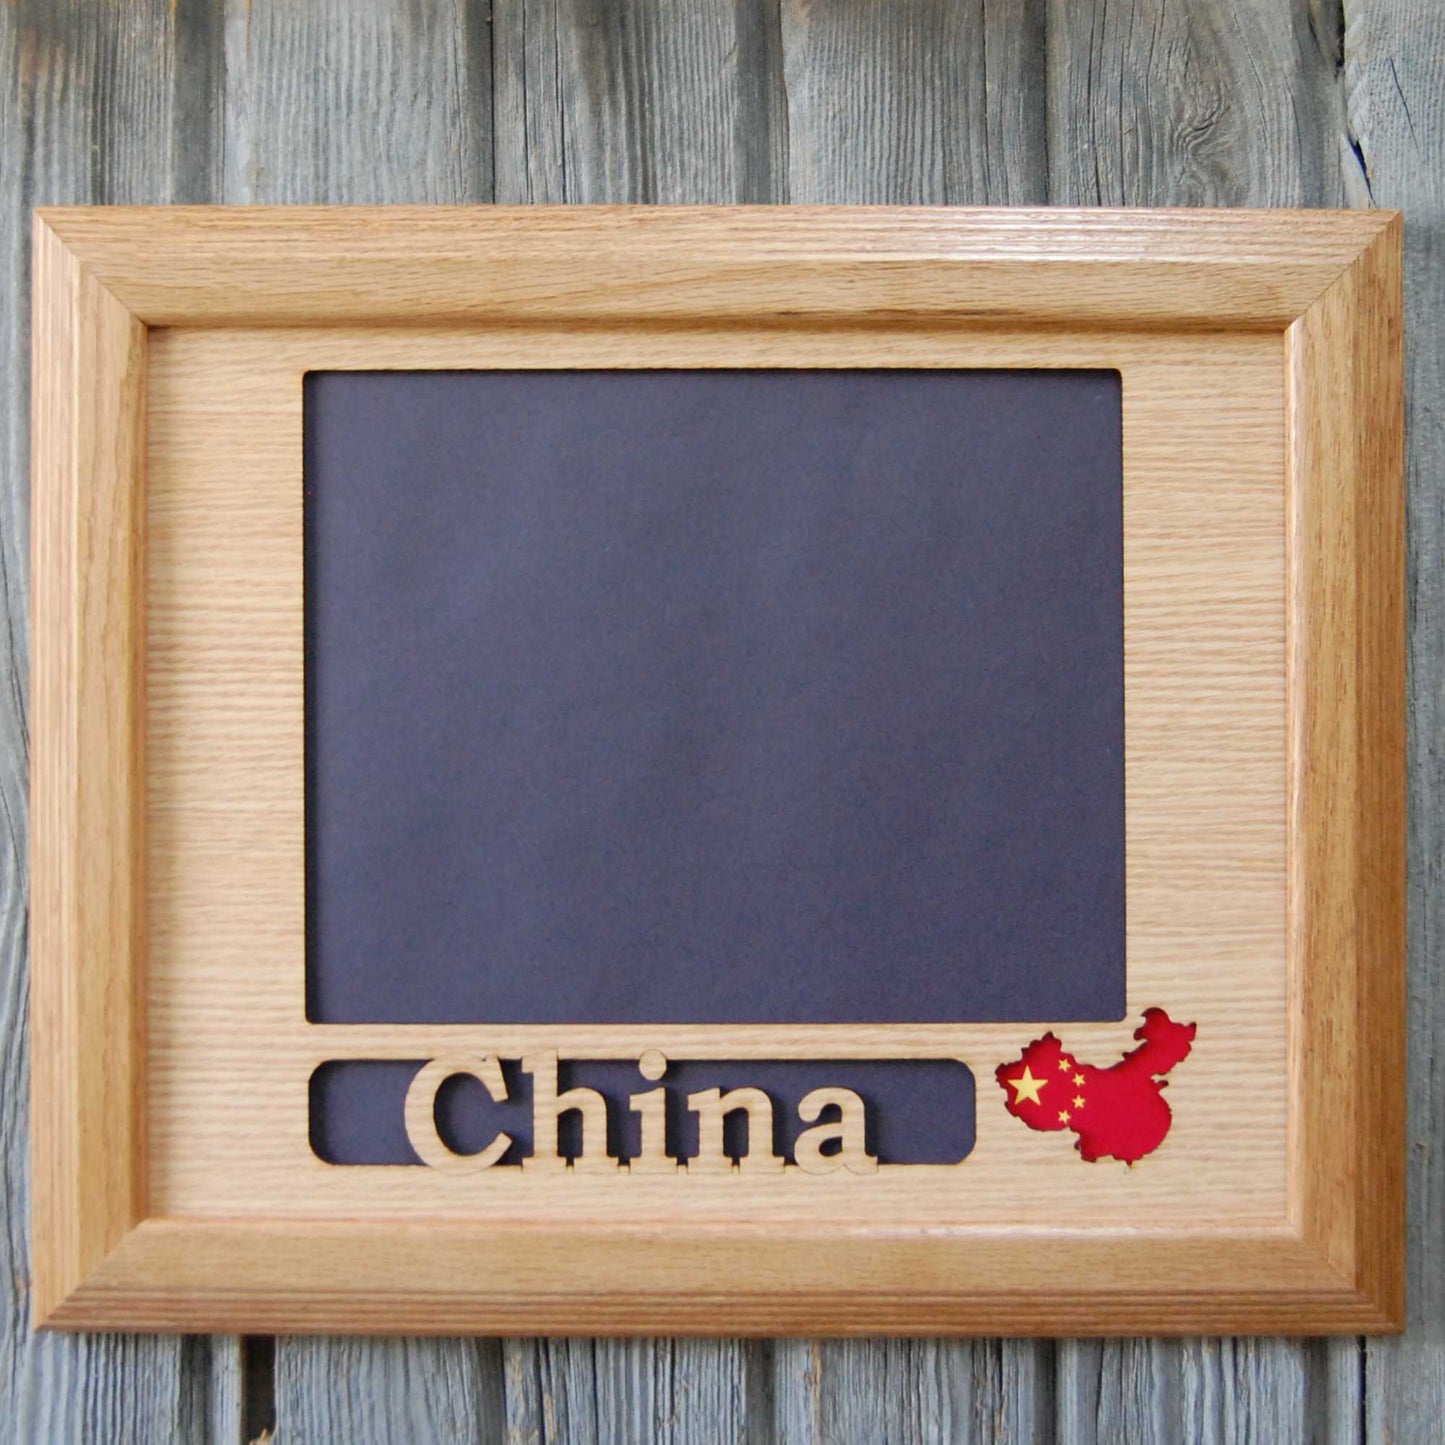 Travel Picture Frame - 11x14 Frame Hold 8x10 Photo or 8 Photos of Various Size